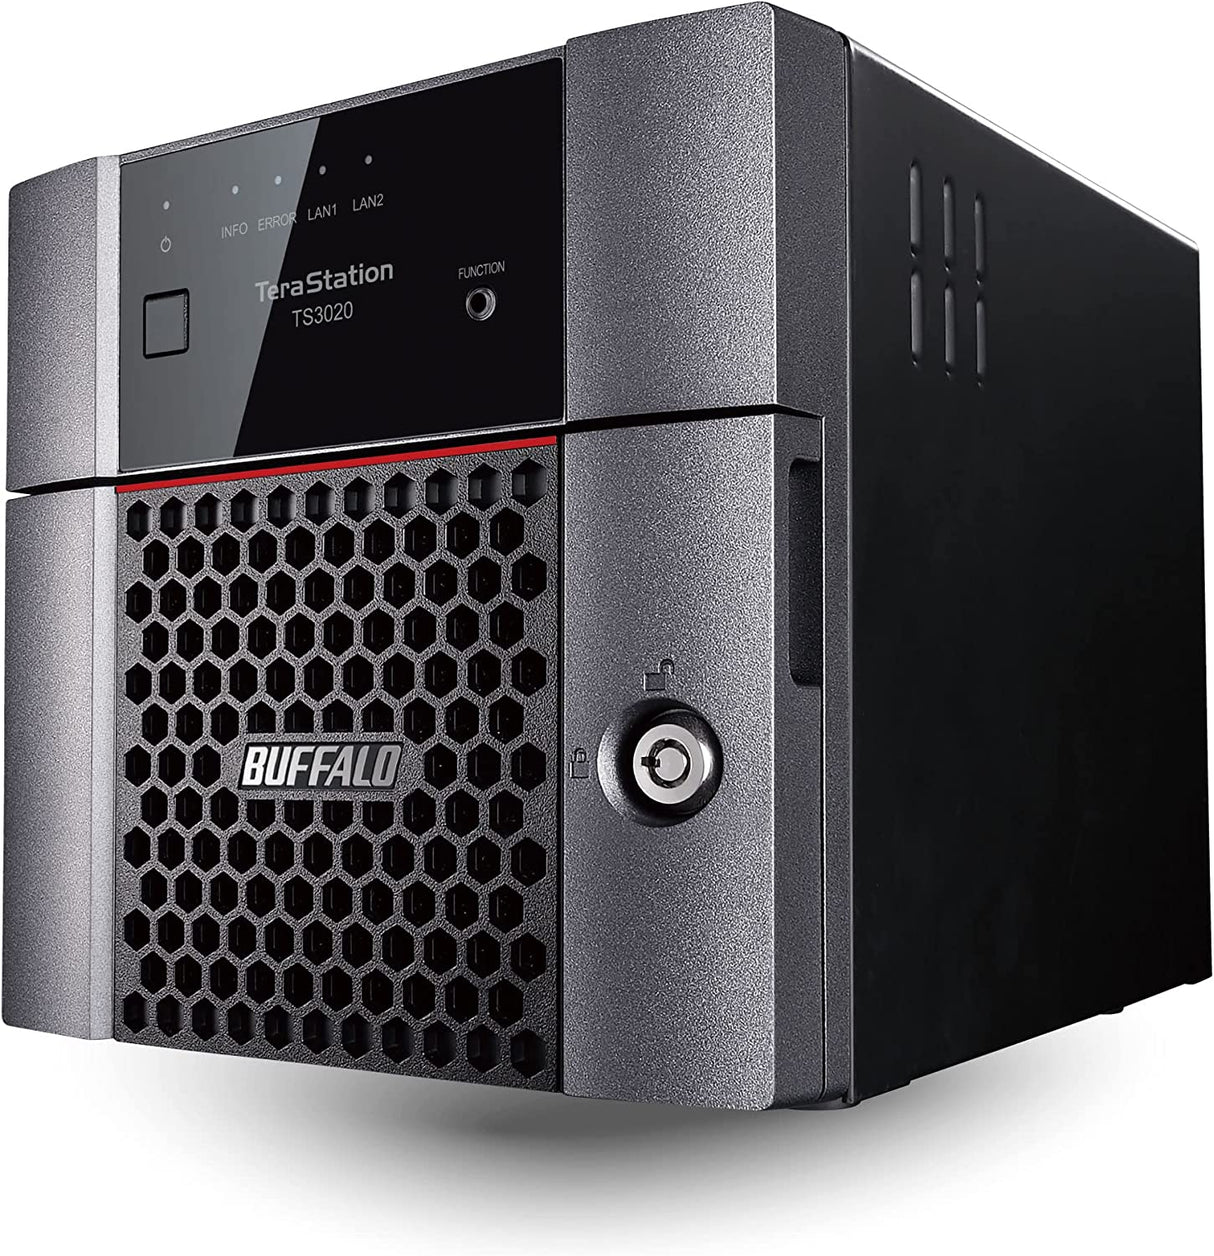 BUFFALO TeraStation 3220DN 2-Bay Desktop NAS 8TB (2x4TB) with HDD NAS Hard Drives Included 2.5GBE / Computer Network Attached Storage/Private Cloud/NAS Storage/Network Storage/File Server 8 TB TeraStation 3220DN Desktop NAS - 2 Drive Bays